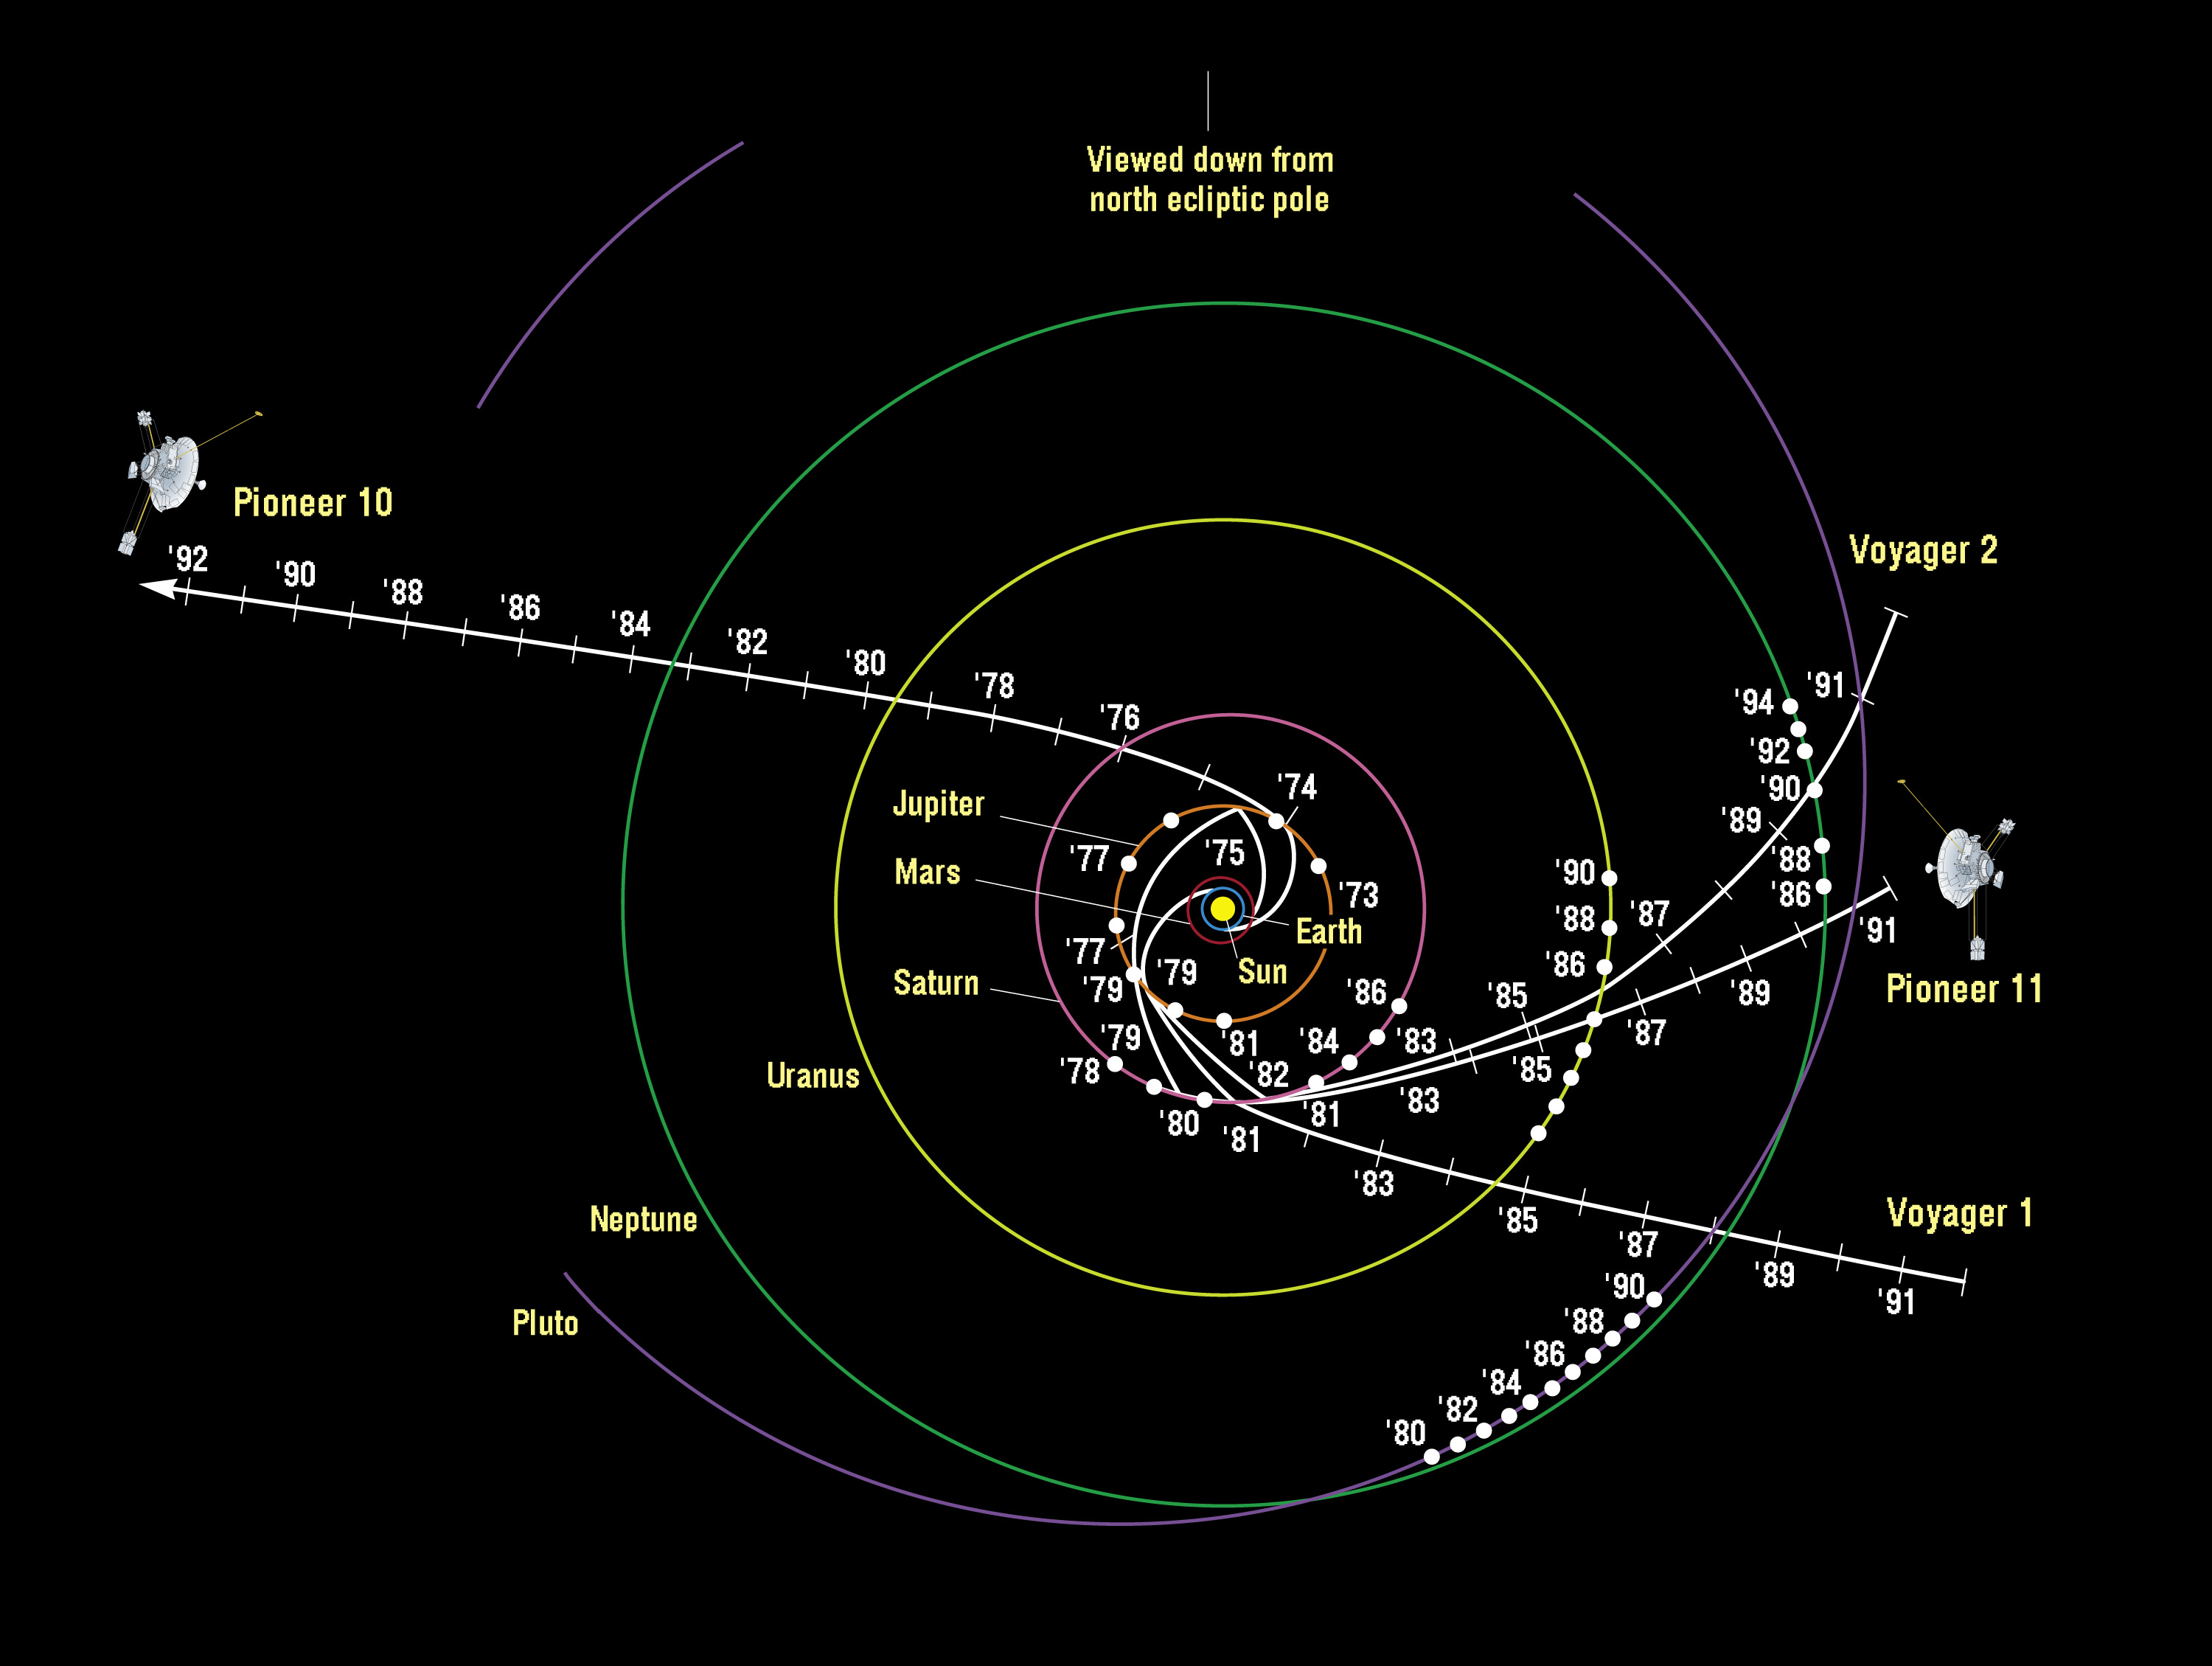 Chart showing trajectories of Pioneers 10 and 11 and Voyagers 1 and 2.